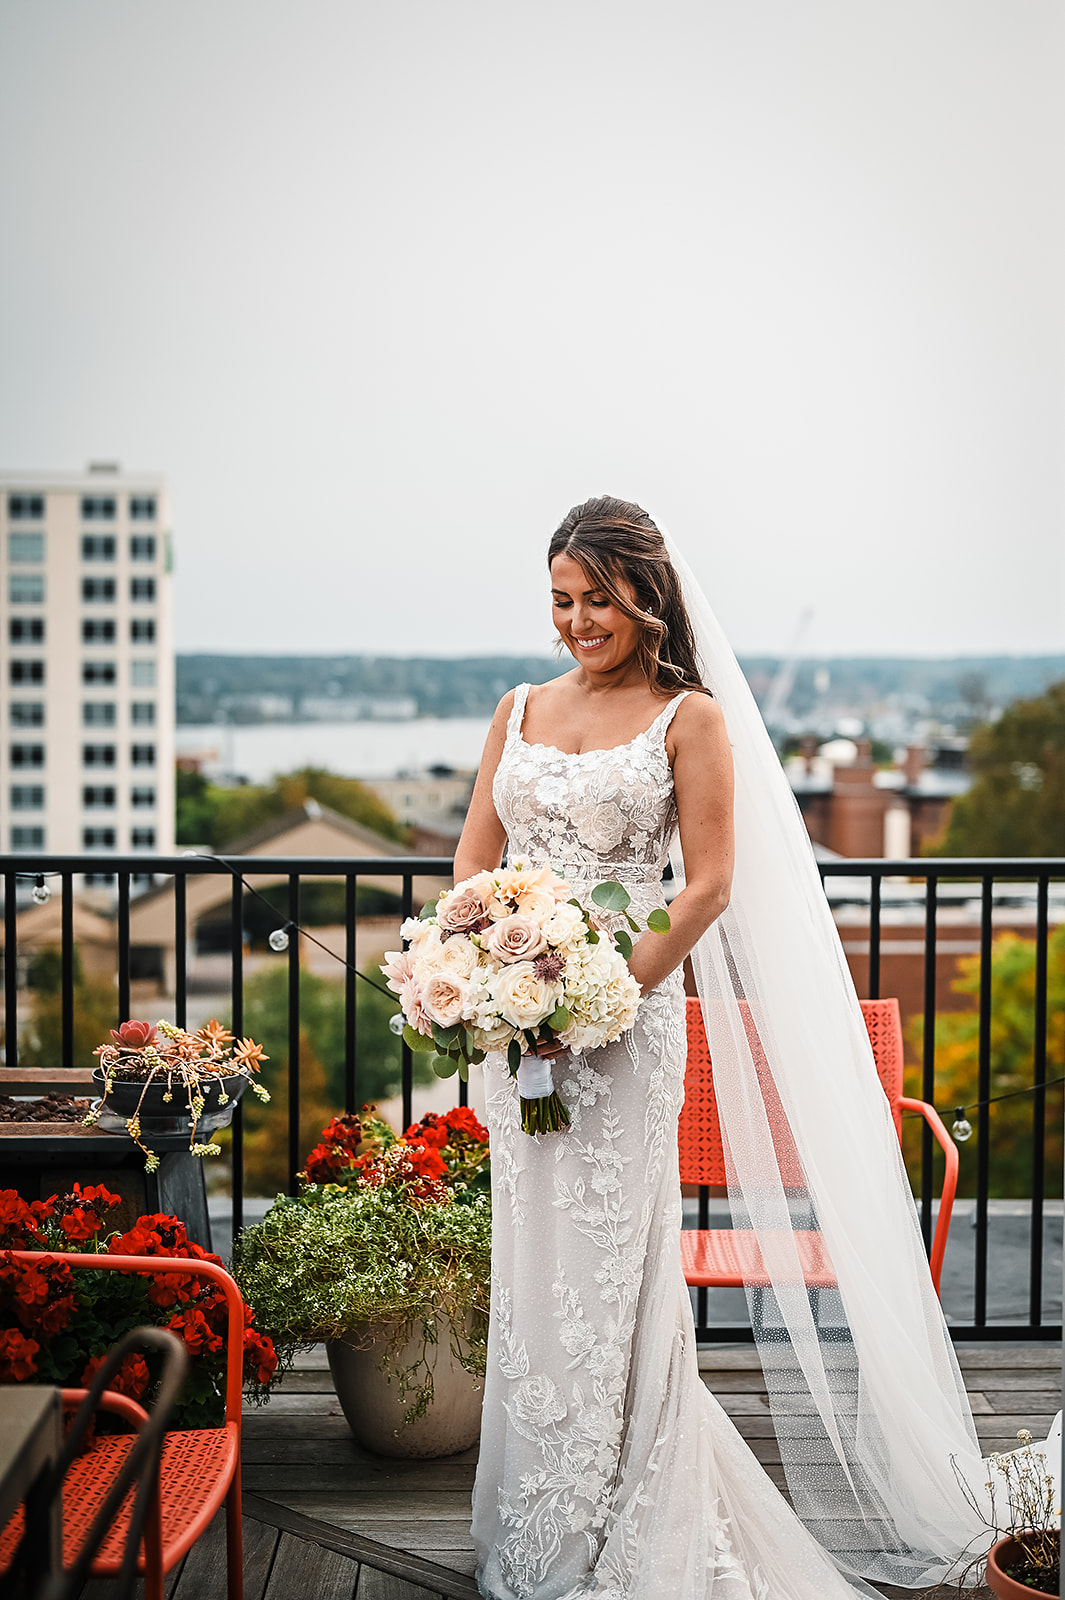 Grace and Danny's September wedding was beyond beautiful. We started the day in the Old Port where each group got ready.